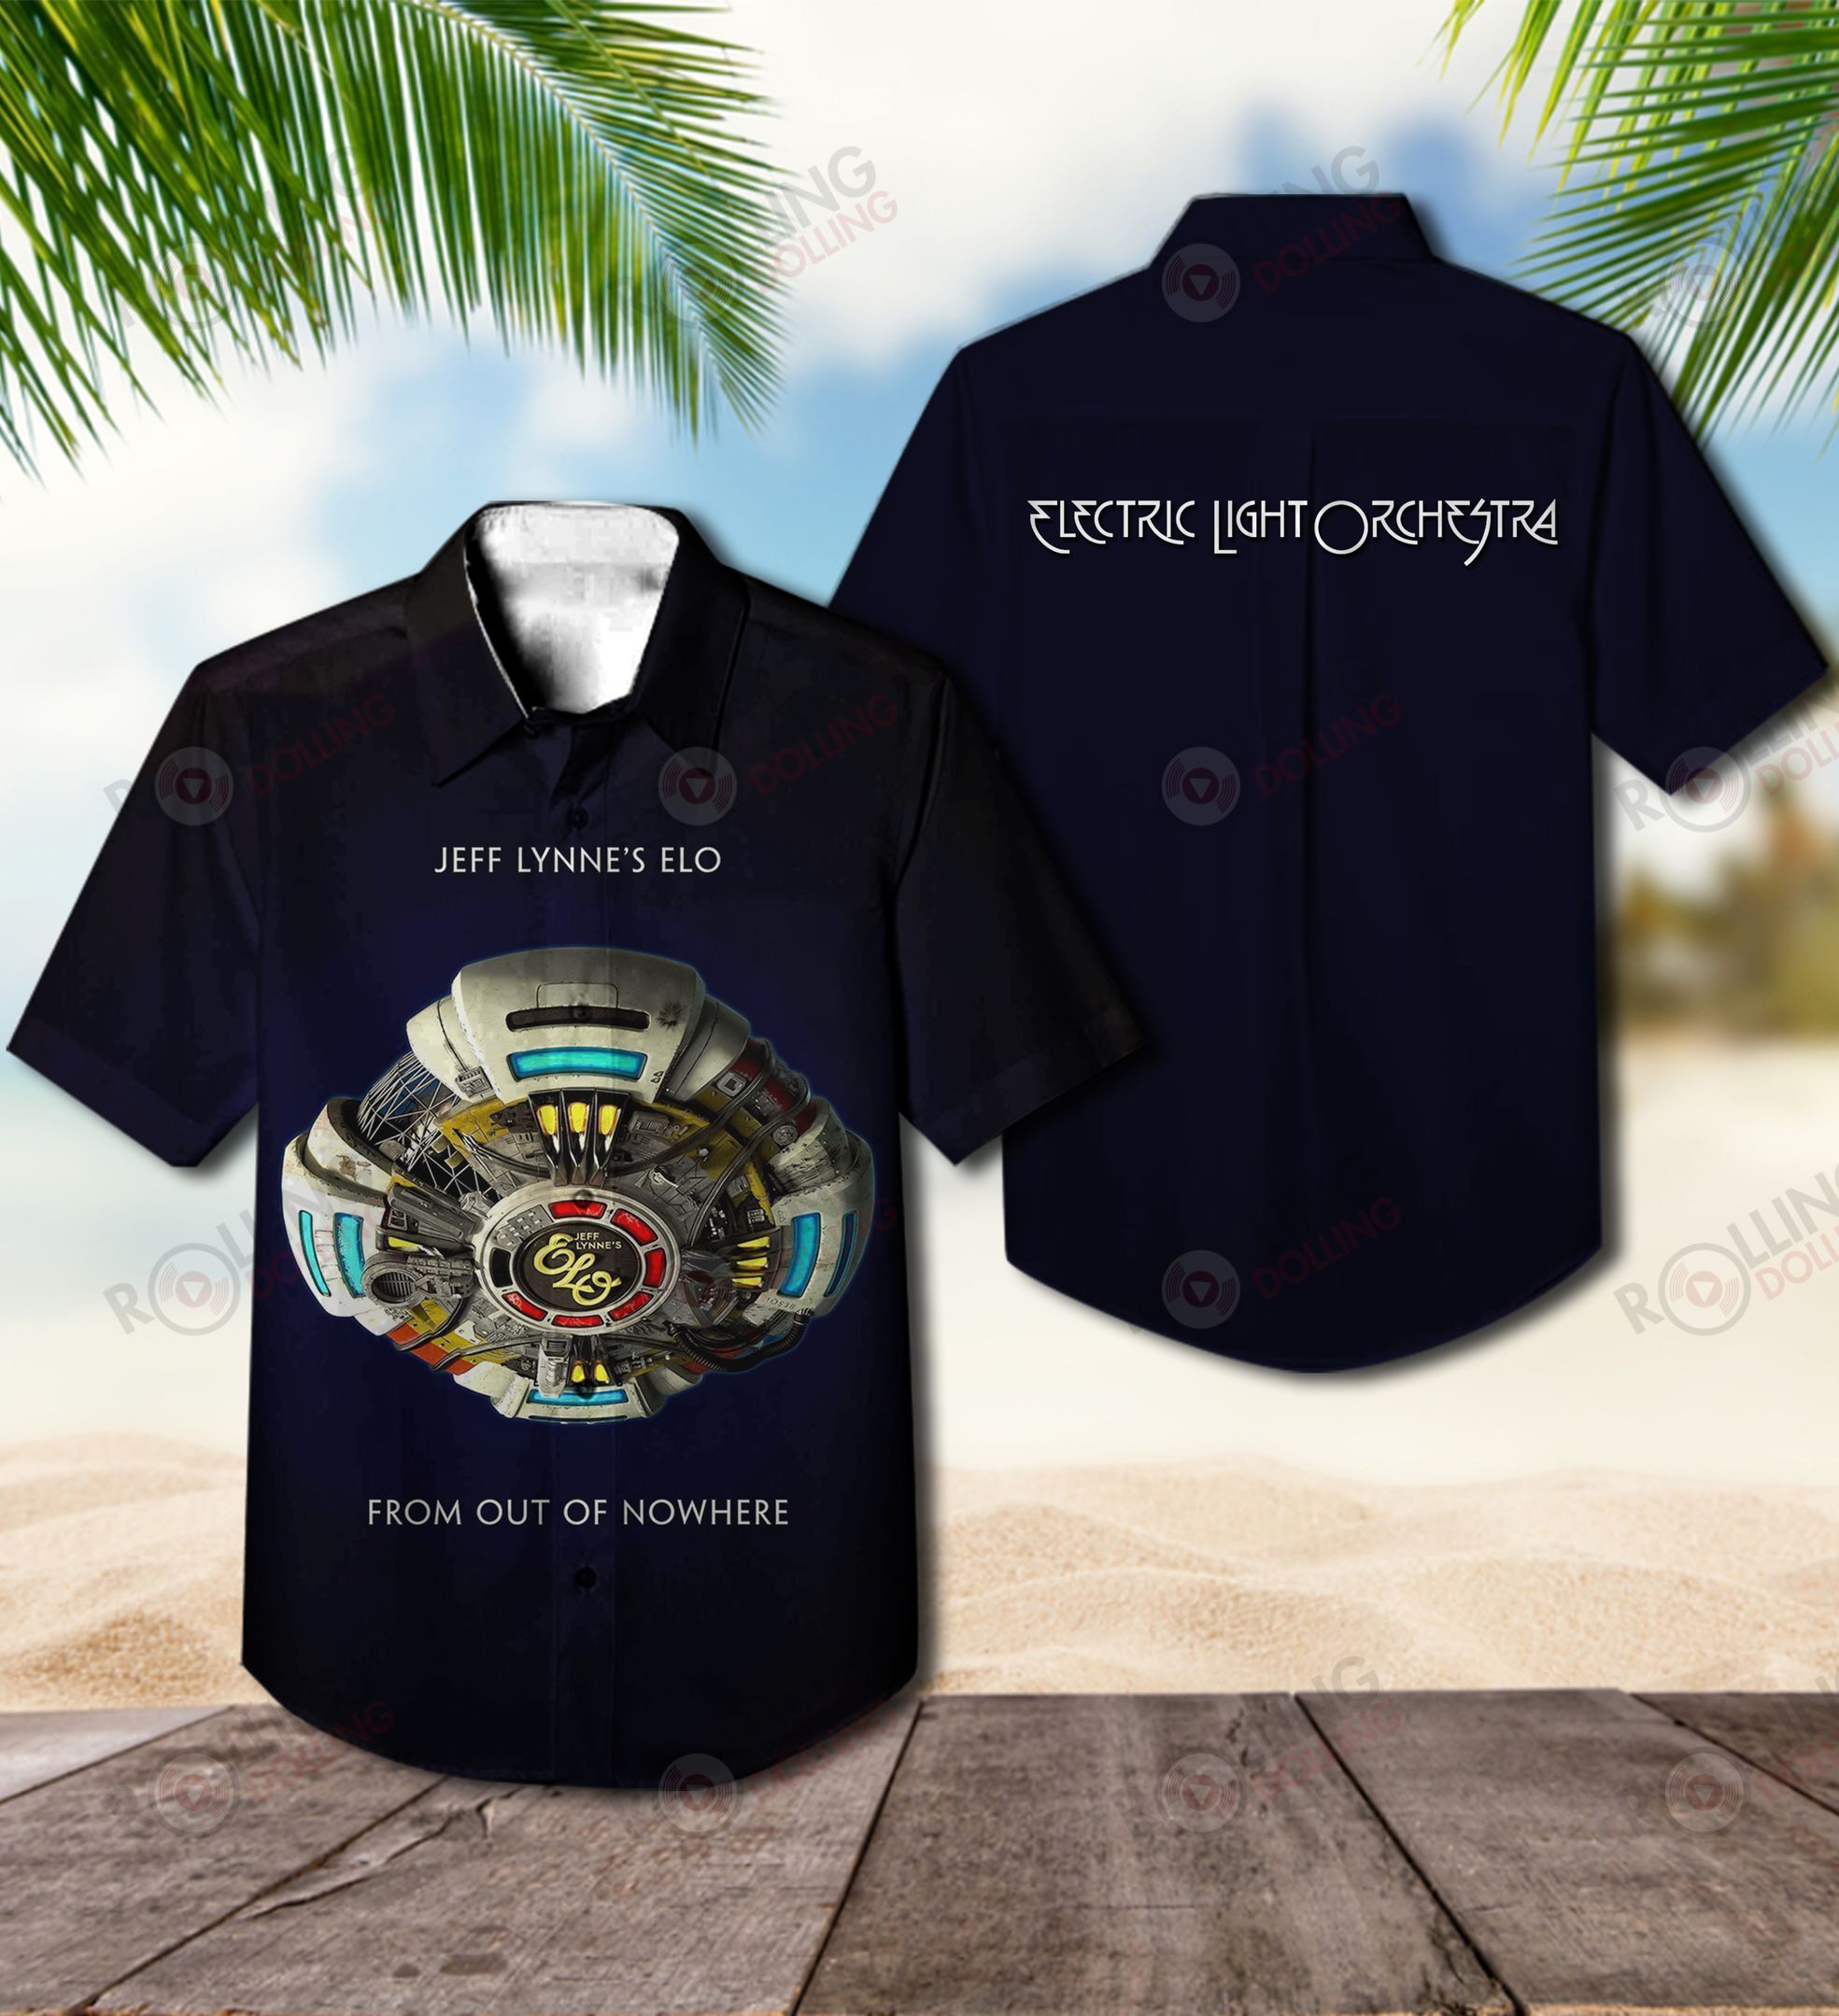 The Hawaiian Shirt is a popular shirt that is worn by Rock band fans 6